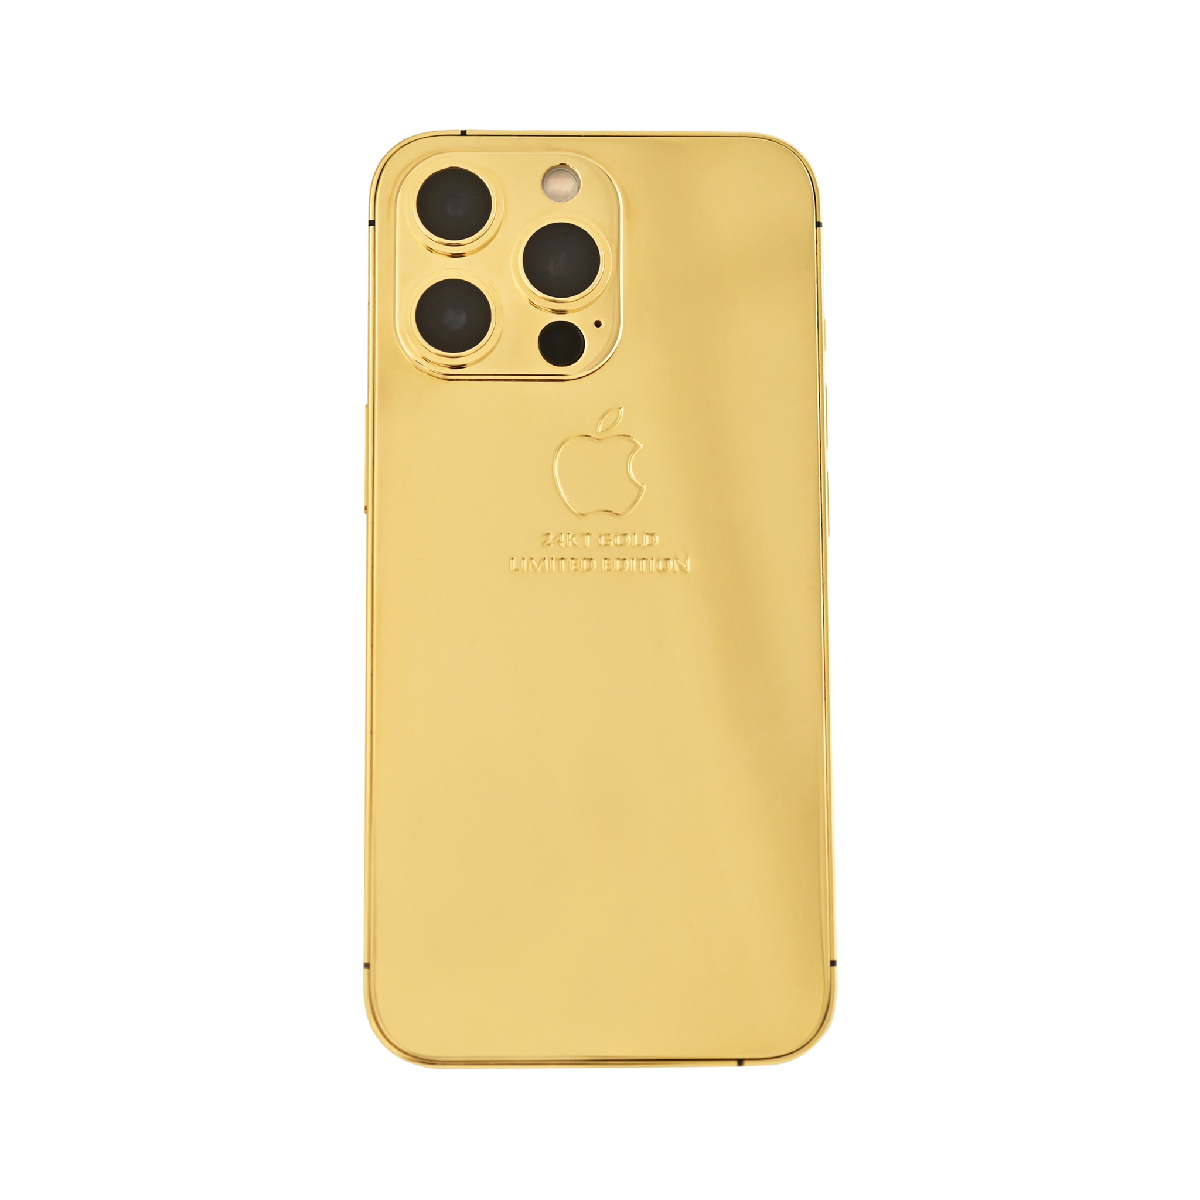 Caviar Luxury 24k Full Gold Customized iPhone 13 Pro 128 GB Limited Edition